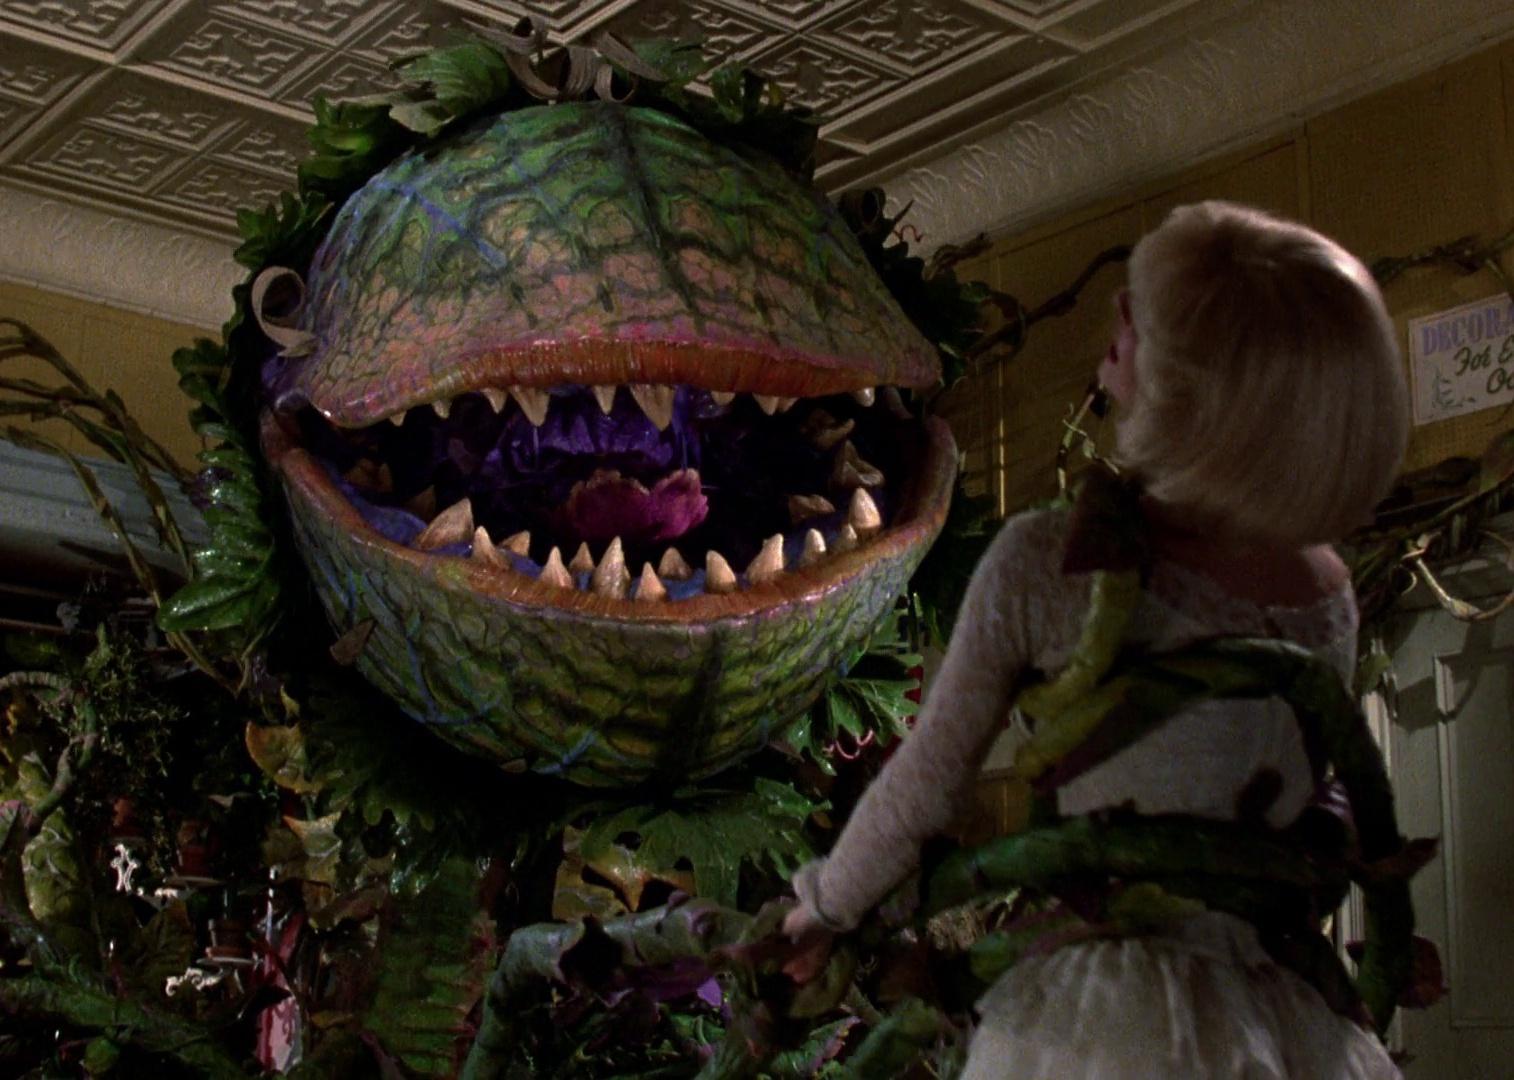 A giant Venus fly trap holds a woman in it's grip.